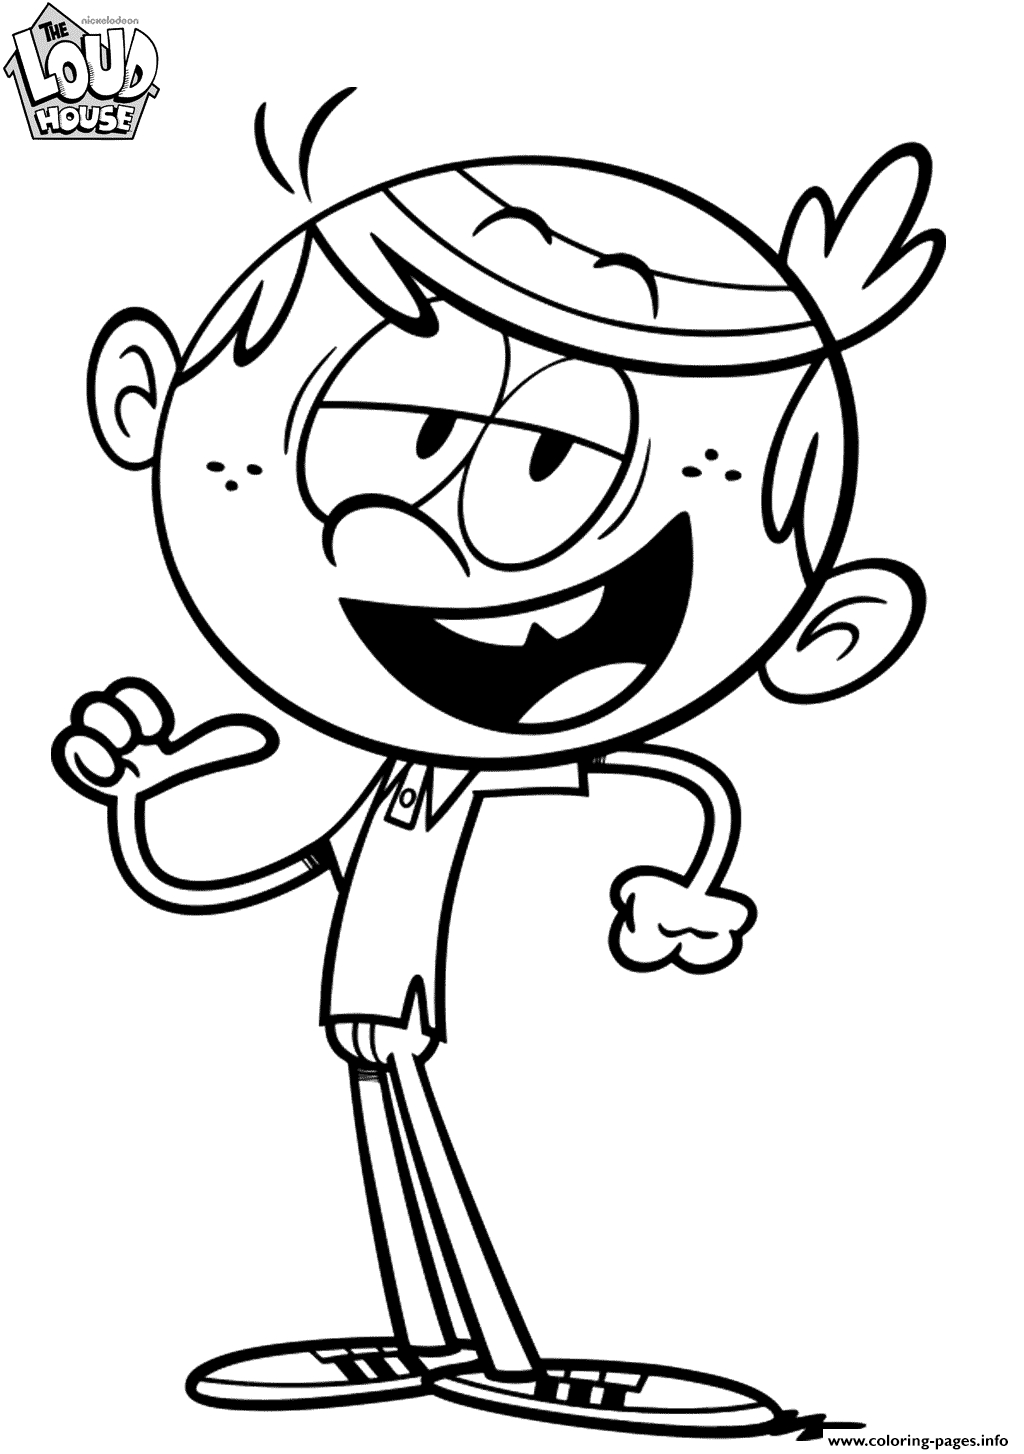 12 Awesome The Loud House Coloring - Printable Loud House Coloring tout Coloriage Loud